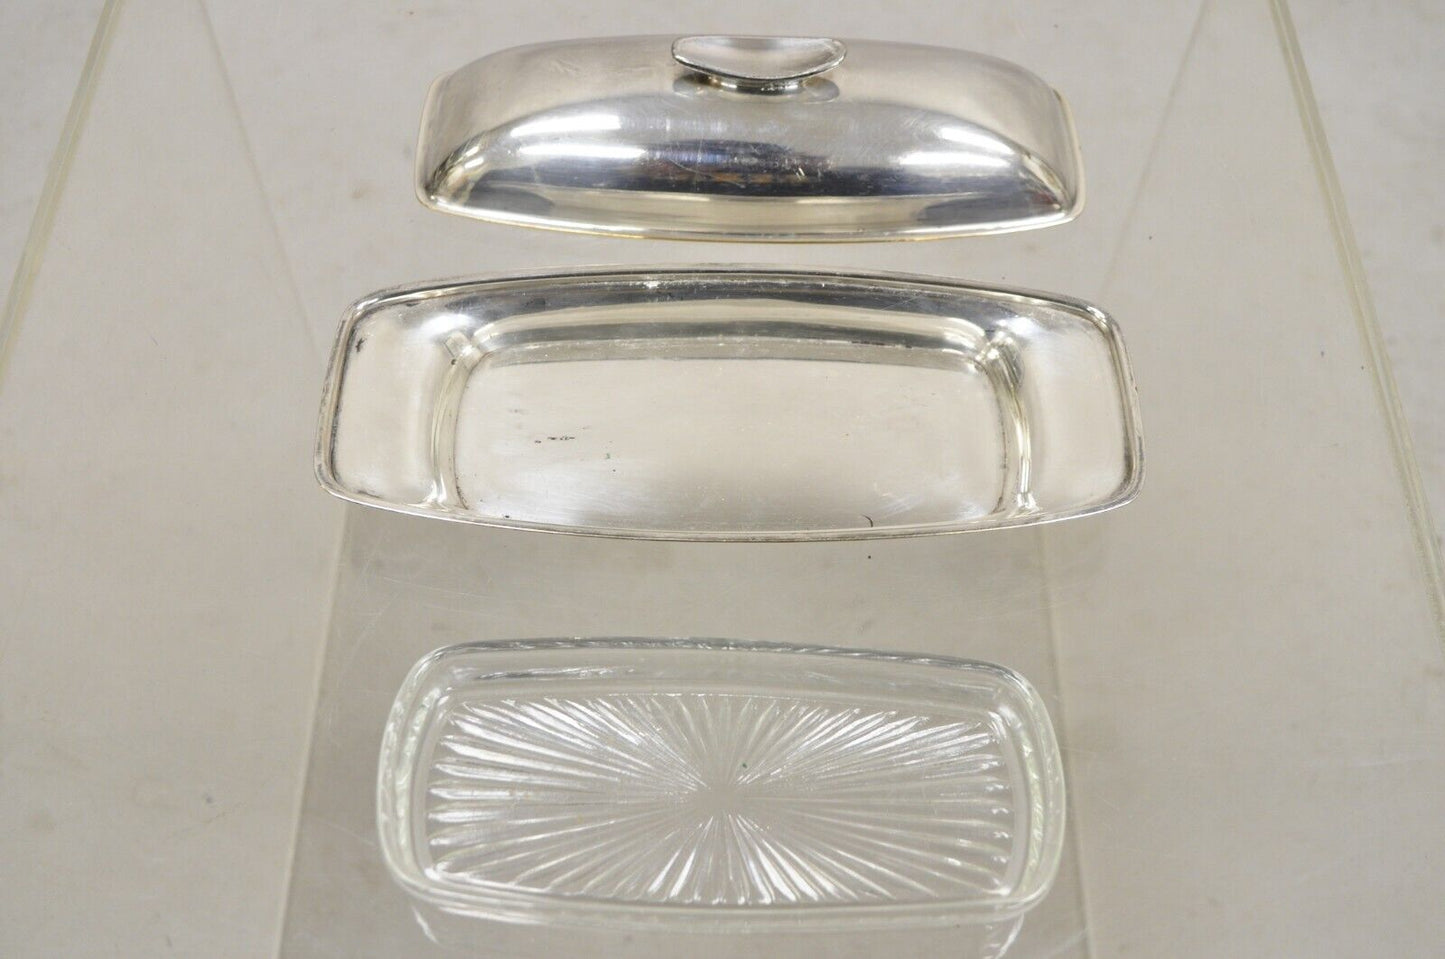 Vintage Gorham YC 775 Silver Plated Modern Butter Dish with Glass Liner